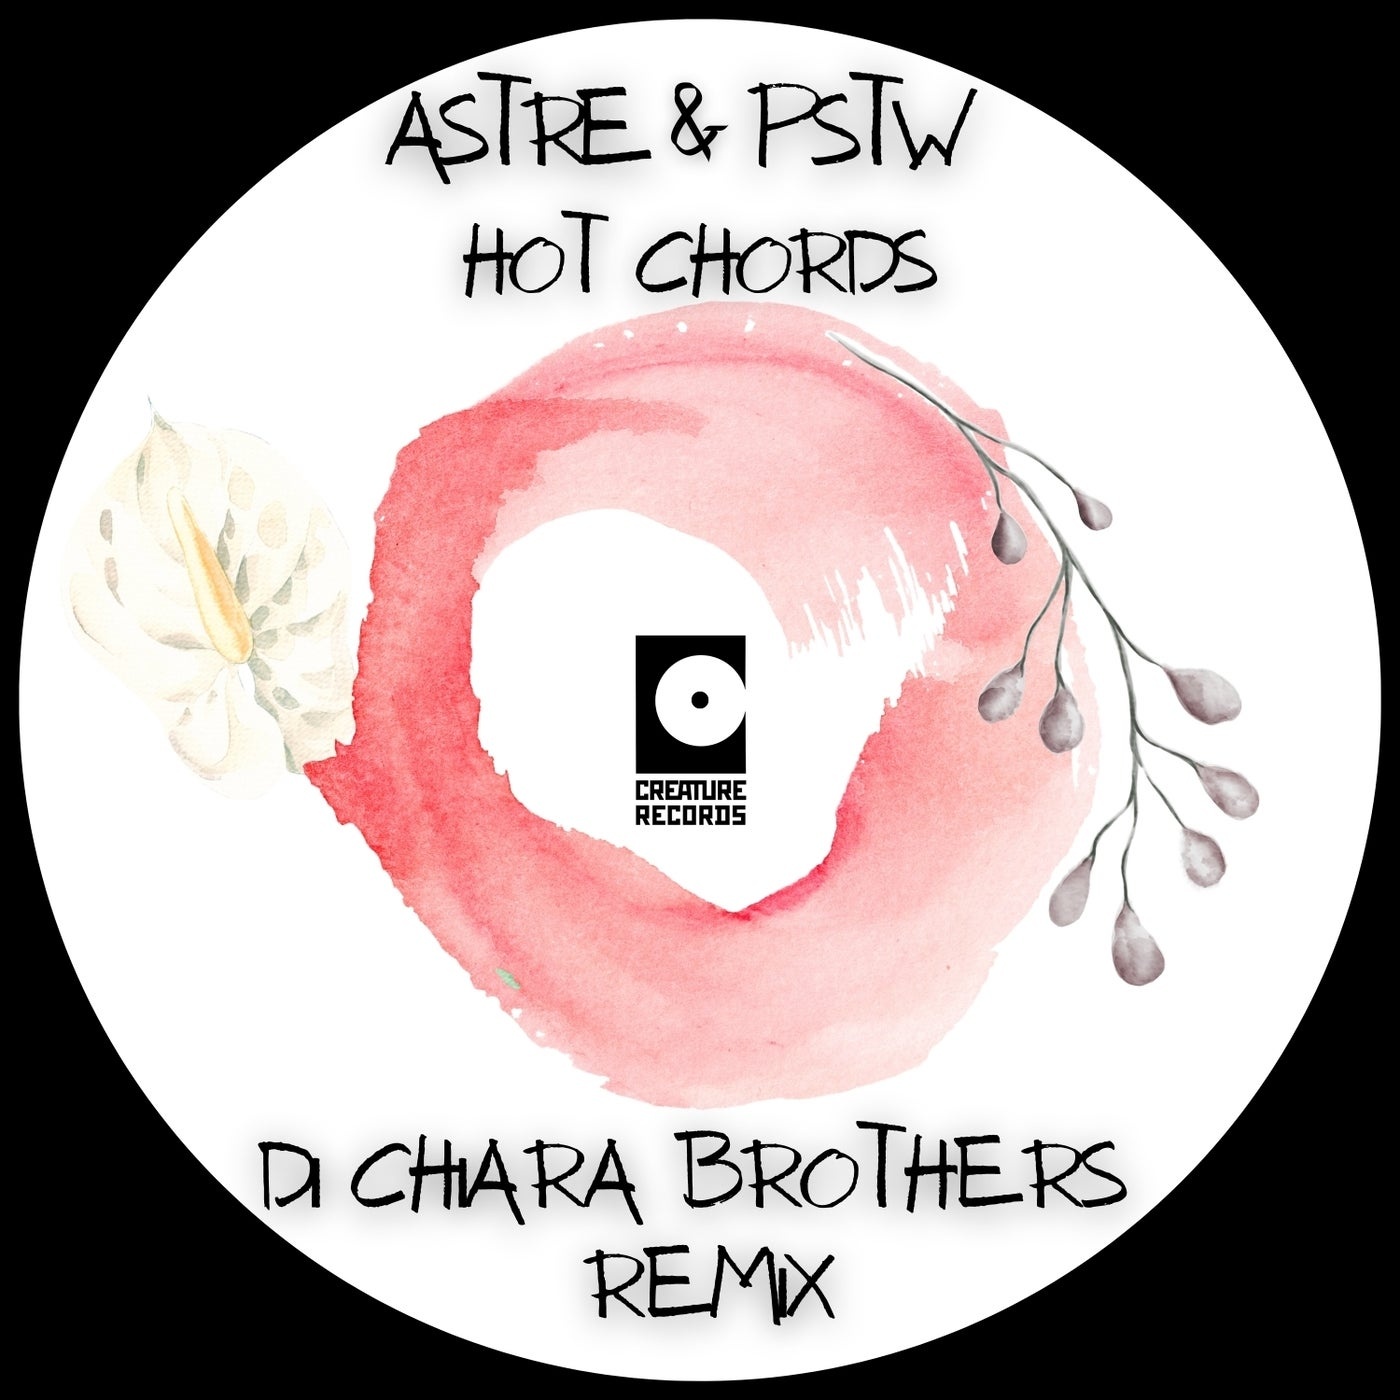 image cover: Astre, PSTW - Hot Chords / CRTR033